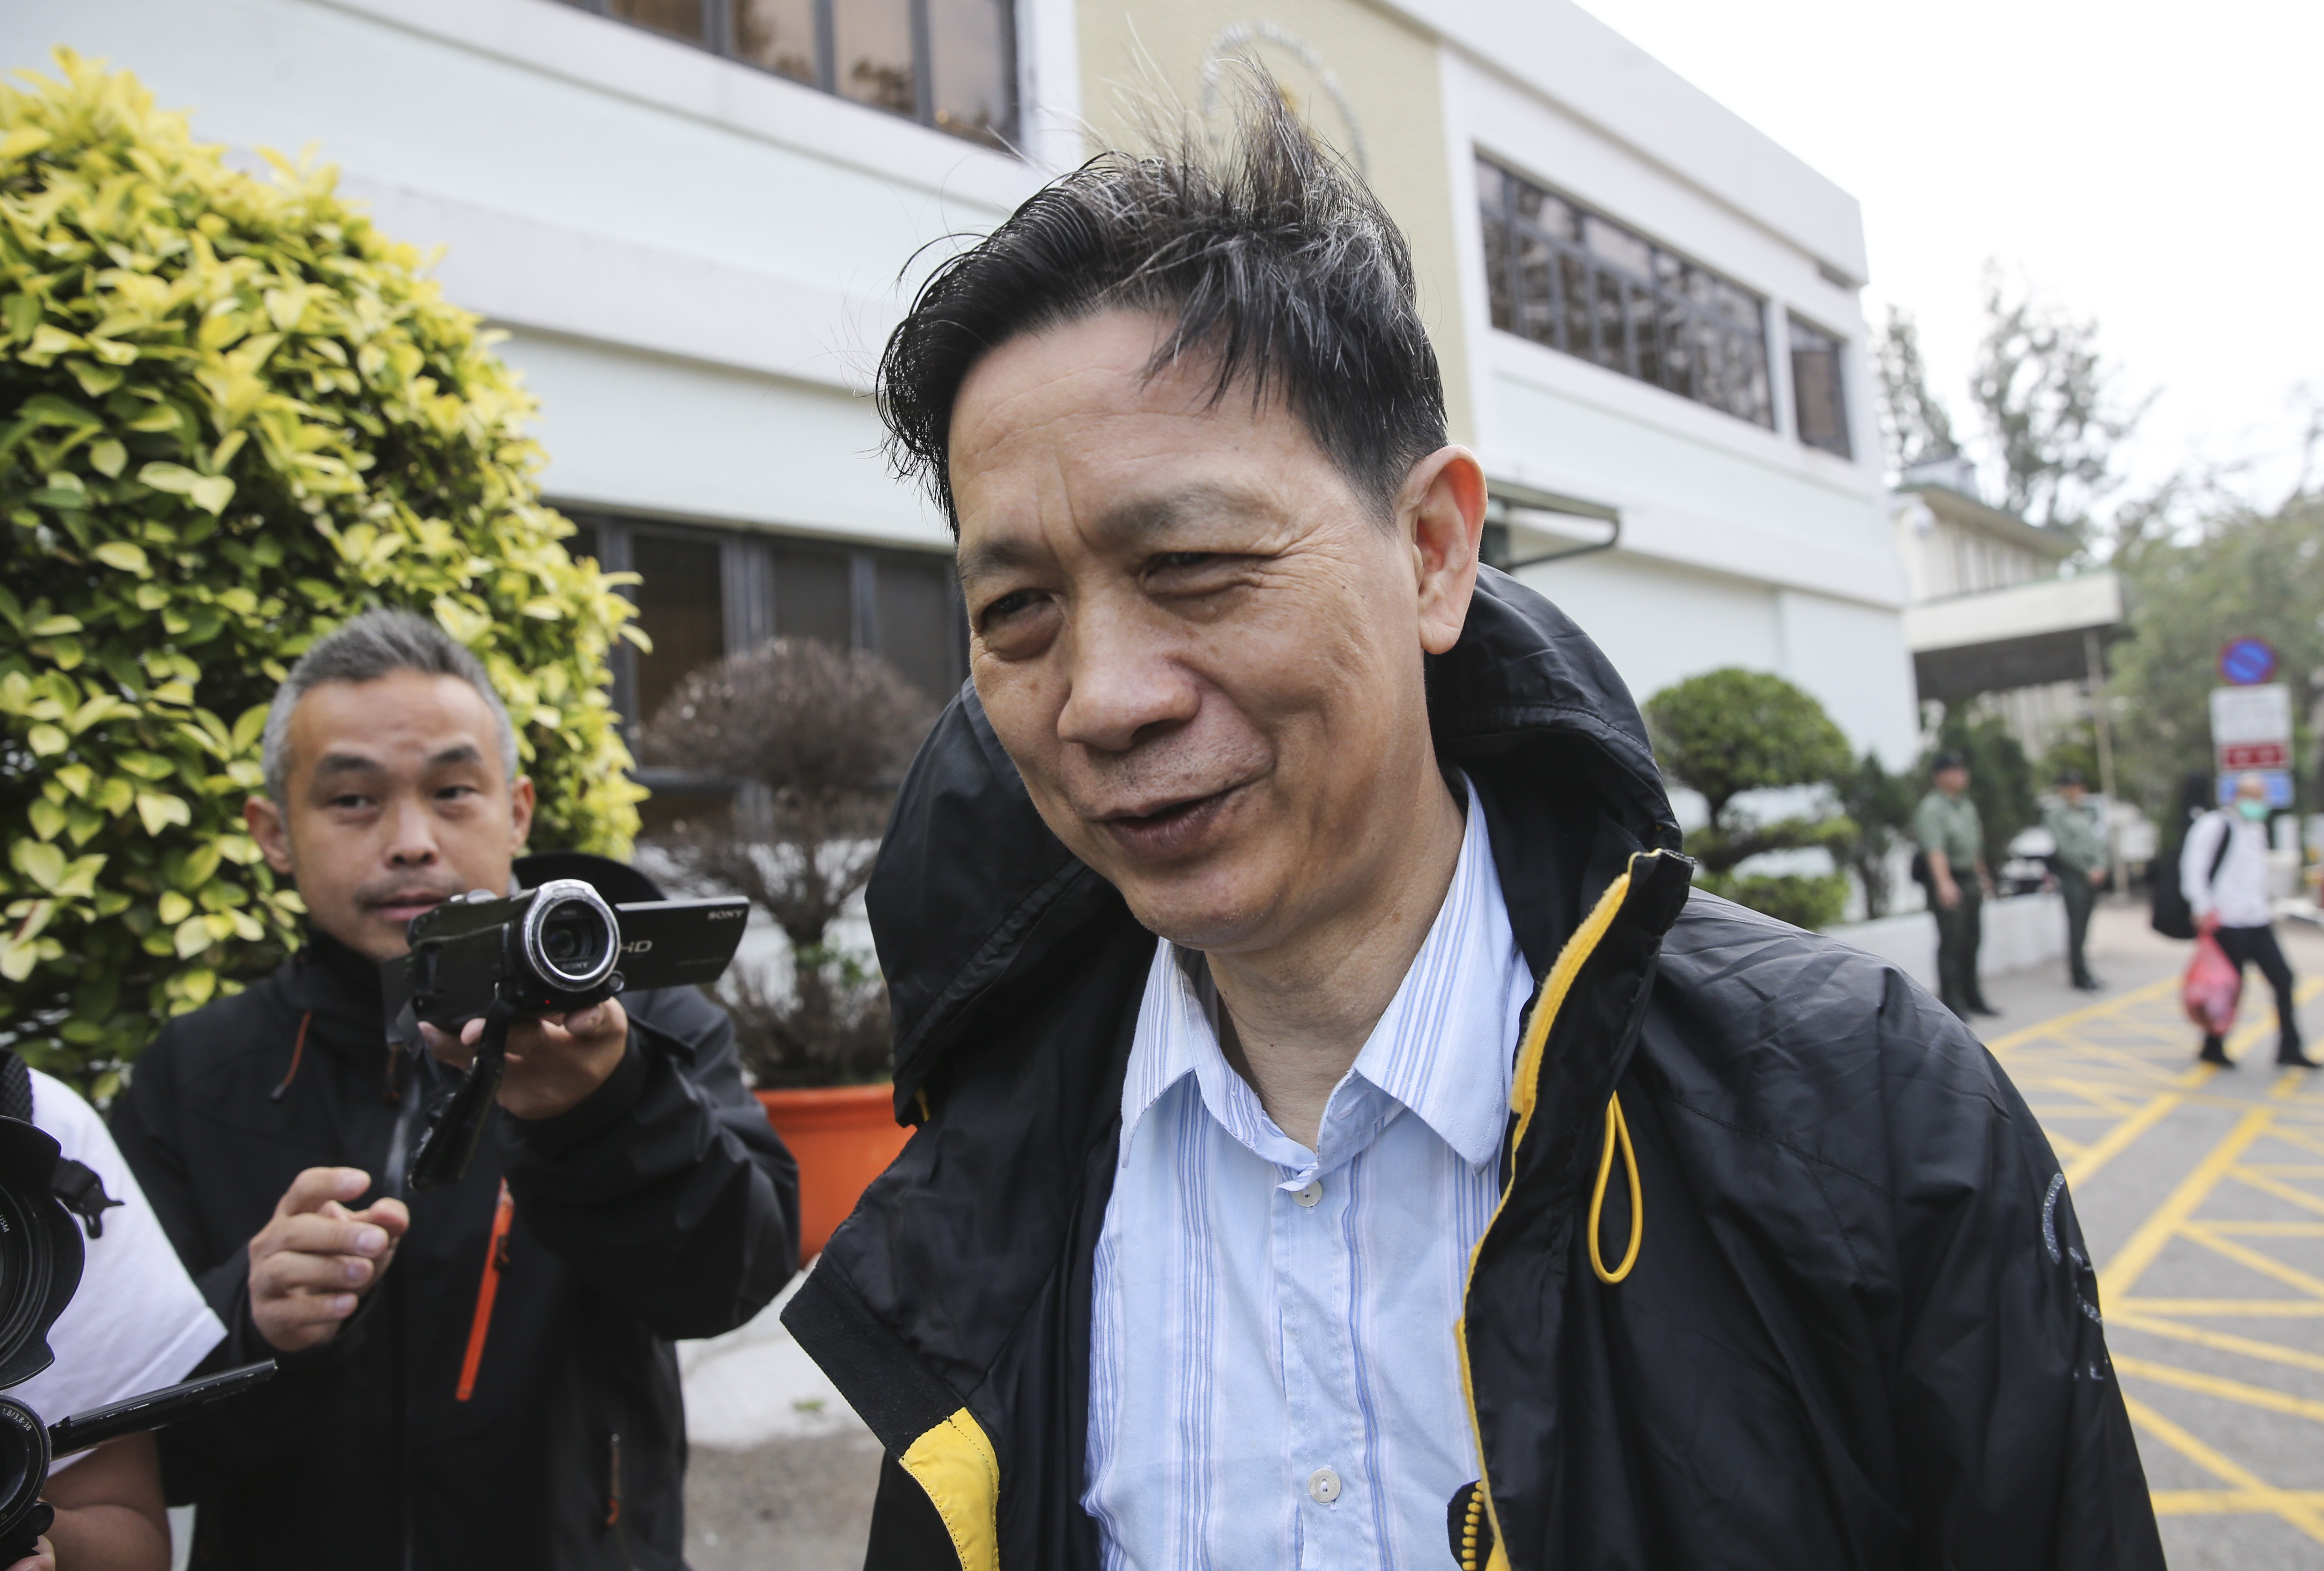 Ex-stock exchange executive Francis Kwan, convicted of handling more than HK$11 million in bribes to city’s former No 2 official, has sentence reduced for good behaviour